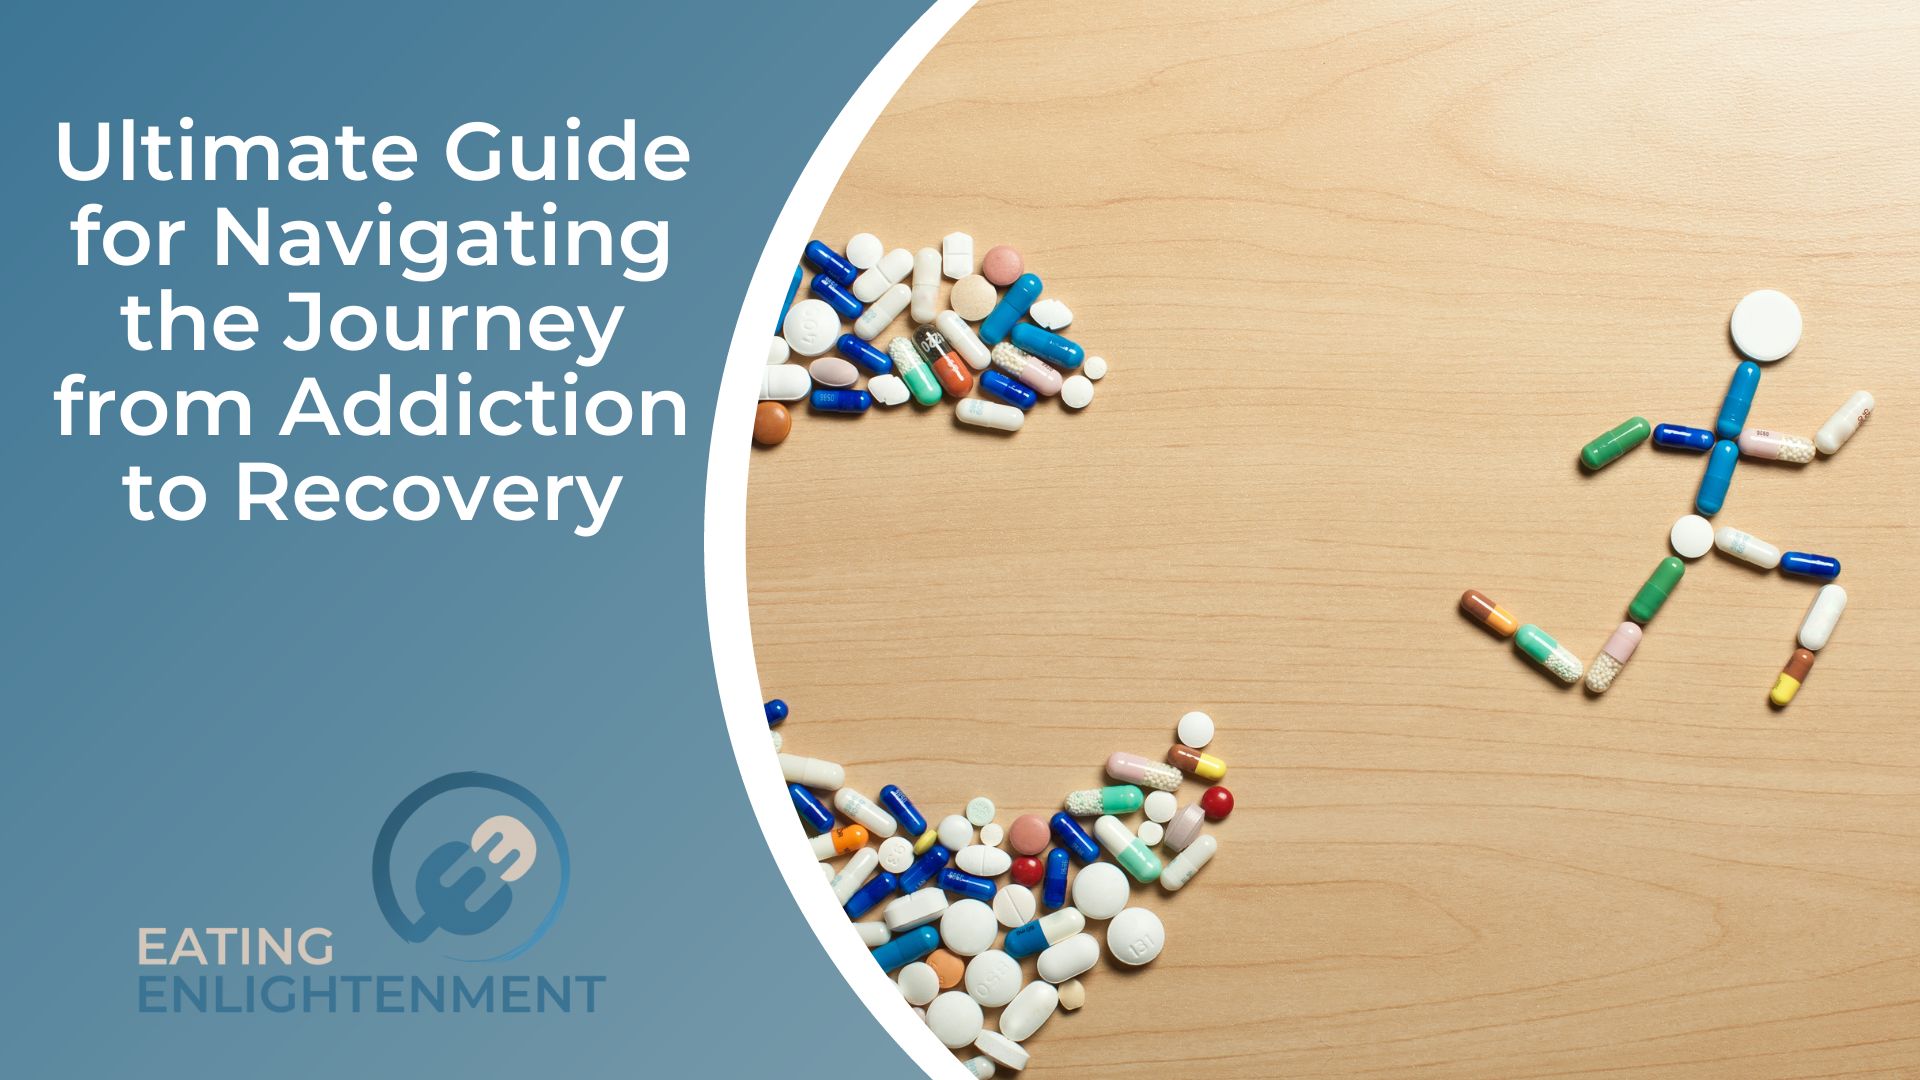 Ultimate Guide for Navigating the Journey from Addiction to Recovery